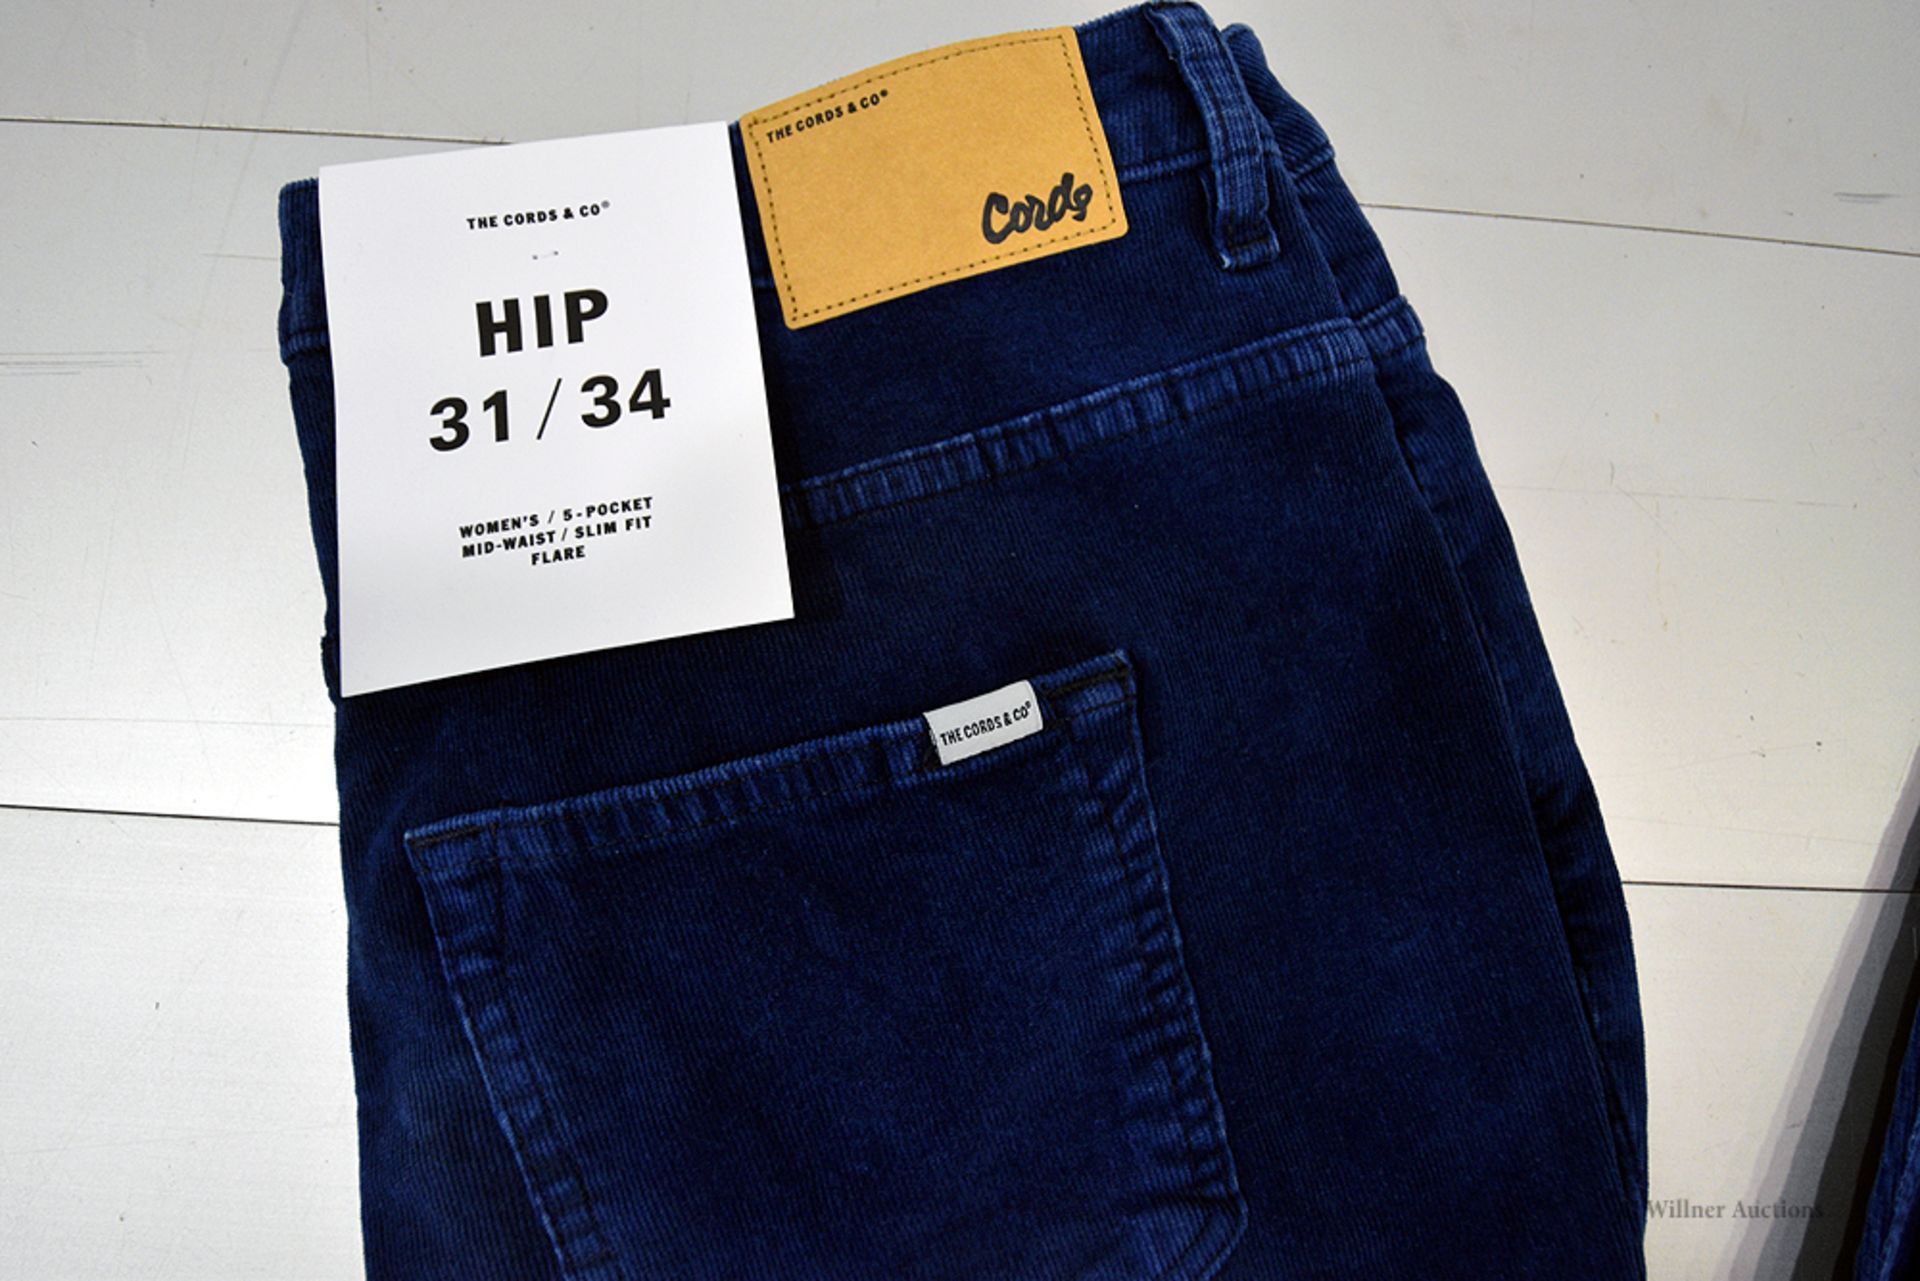 The Cords & Co. "Hip" Womens/Mid Waist/Slim Fit Flare Pants MSRP $160 - Image 2 of 5